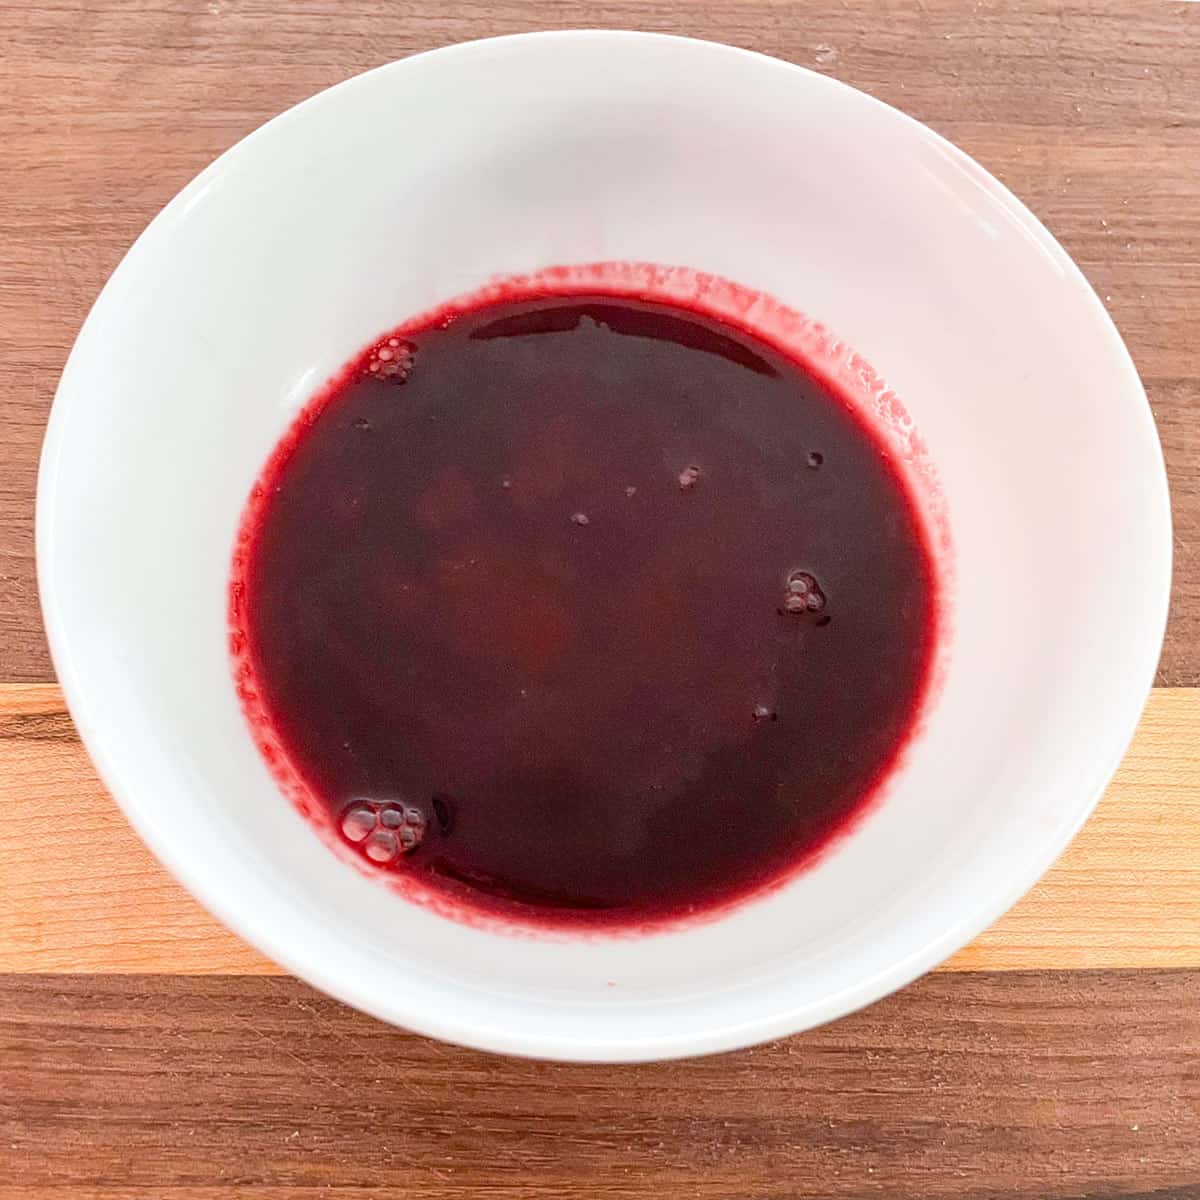 Strained cooked blackberry juice in a small bowl.